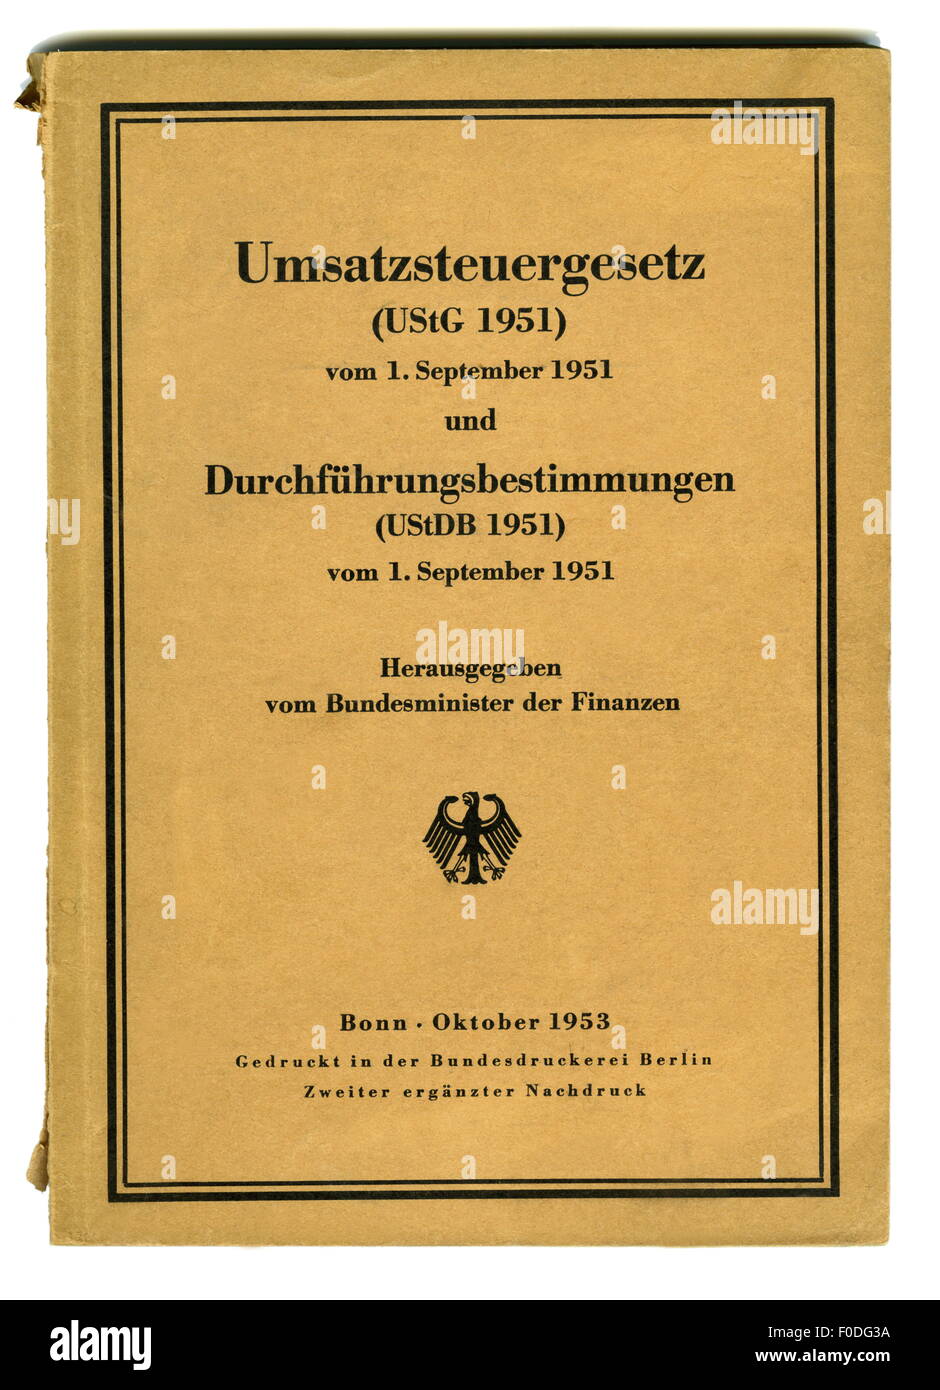 money / finances,interest and taxes,Value Added Tax Act and implementing provisions as of 1.9.1951,cover,publisher: Federal Minister of Finance,Bonn,October 1953,20th century,1950s,50s,Germany,rules,universal law,general law,delegated legislation,tax law,tax laws,value added tax,value added taxes,UStG,UStDB,ministry of finance,ministries of finance,eagles,federal eagle,Federal Coat of Arms,title page,title pages,title,titles,fee,fees,charges,value-added tax,exclusive of VAT,exclusive of VAT and taxes,implementing provision,b,Additional-Rights-Clearences-Not Available Stock Photo